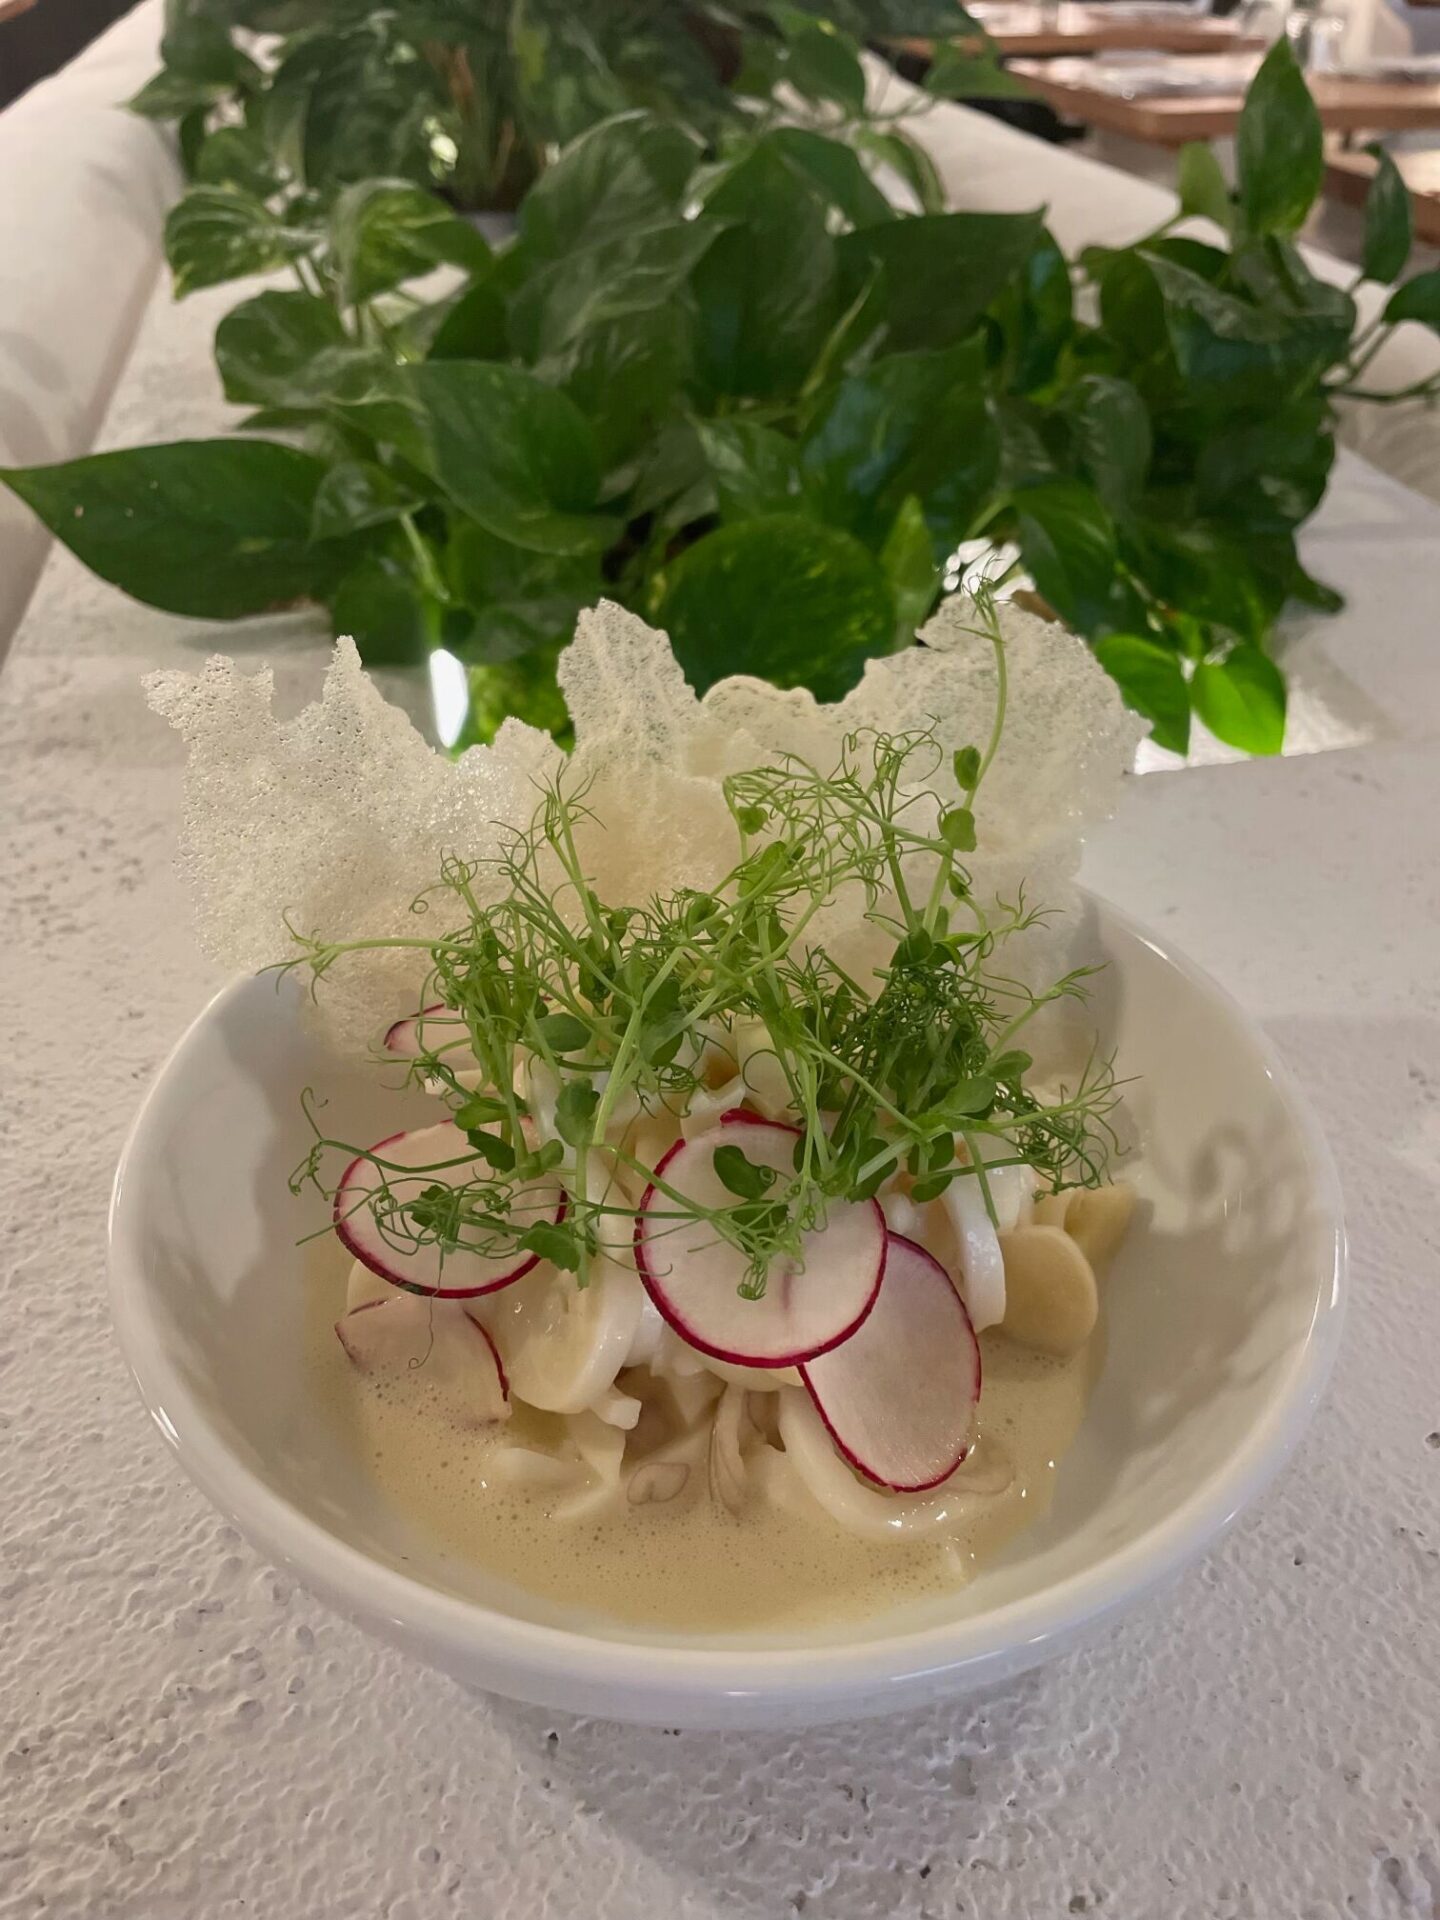 Mauricios Ceviche from The Green House